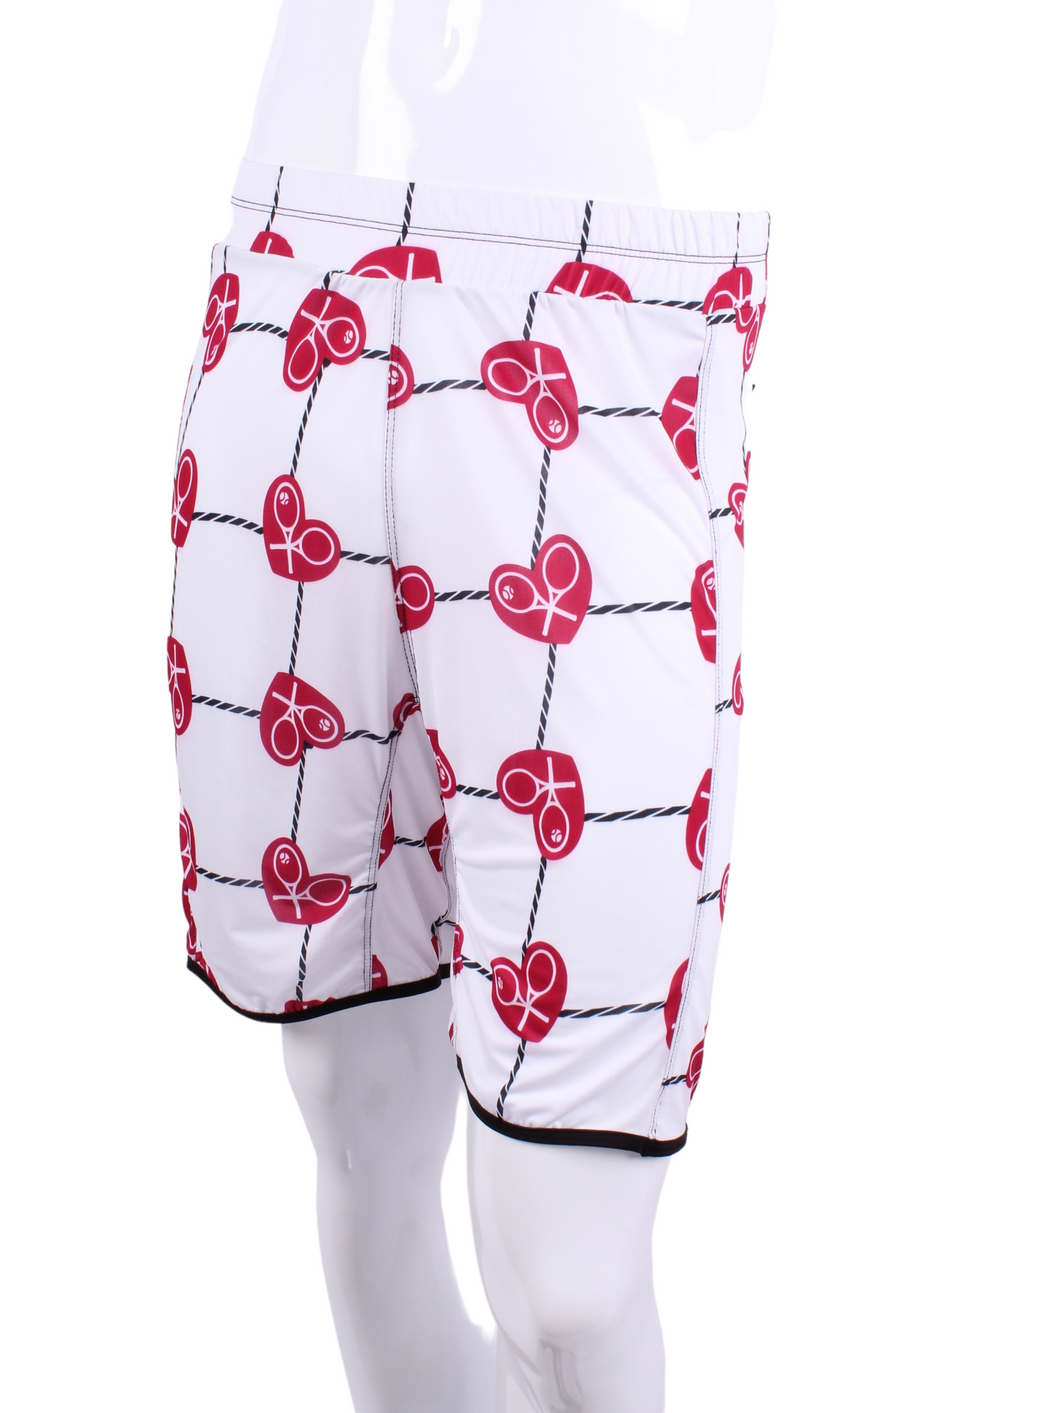 This is our limited edition Men’s Shorts with Raspberry Red Hearts and Net.  This piece has a silky and soft fabric. Back pockets to hold tennis balls.  We make these in very small quantities - by design.  Unique.  Luxurious.  Comfortable.  Cool.  Fun.